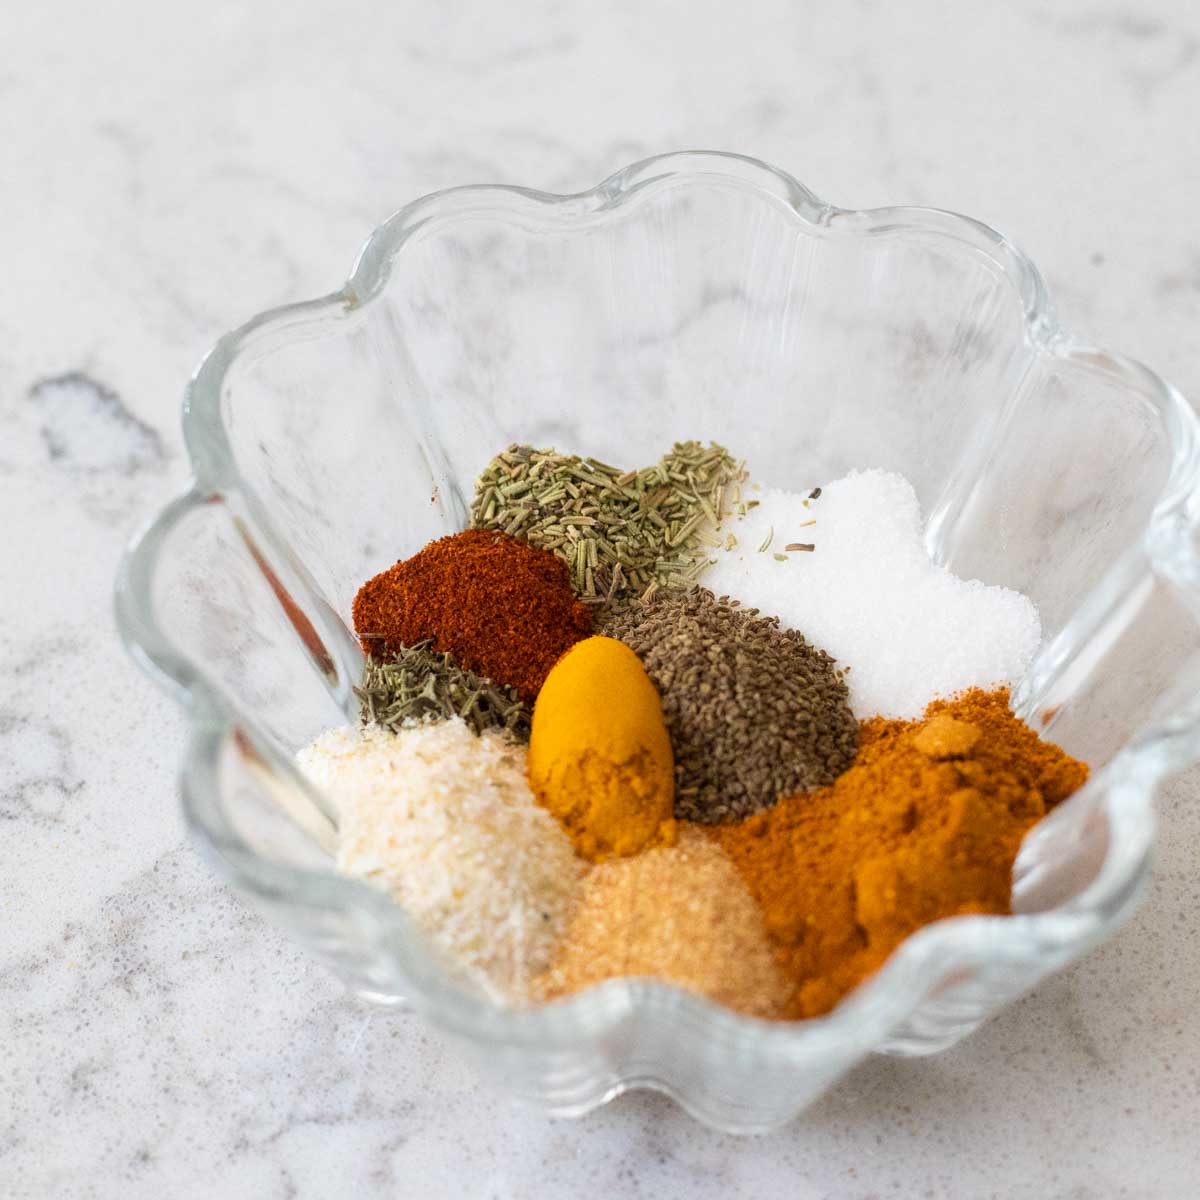 The spices to make the seasoned salt are in a small bowl with ruffled edges.